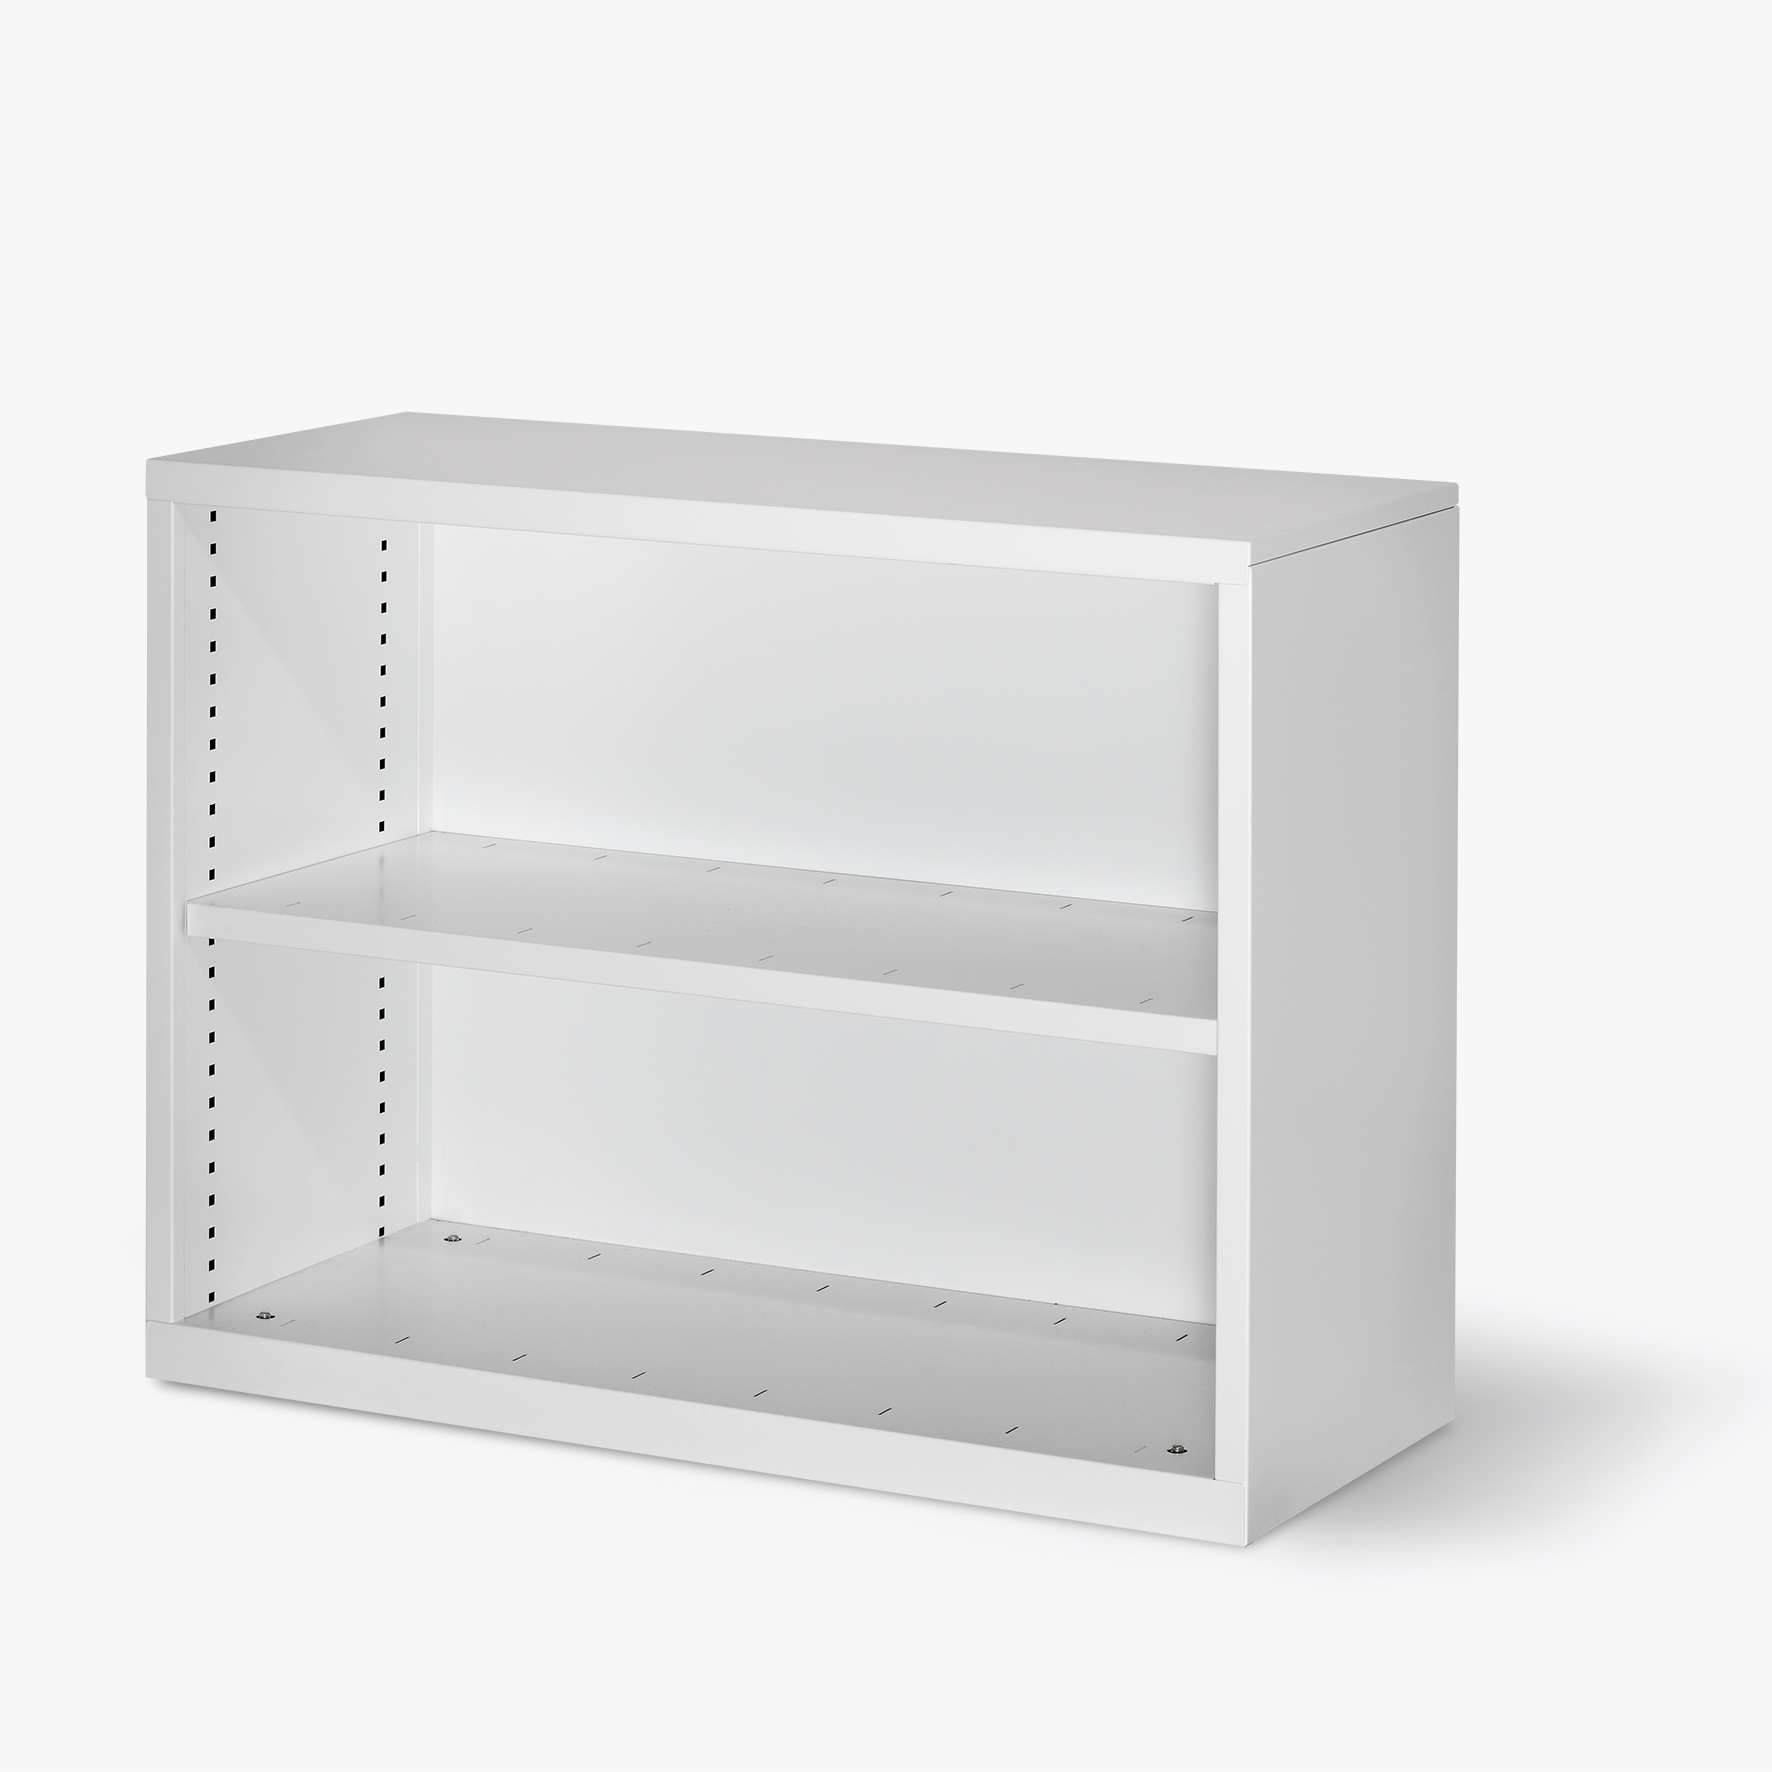 S-Series SB Bookcase by Planex